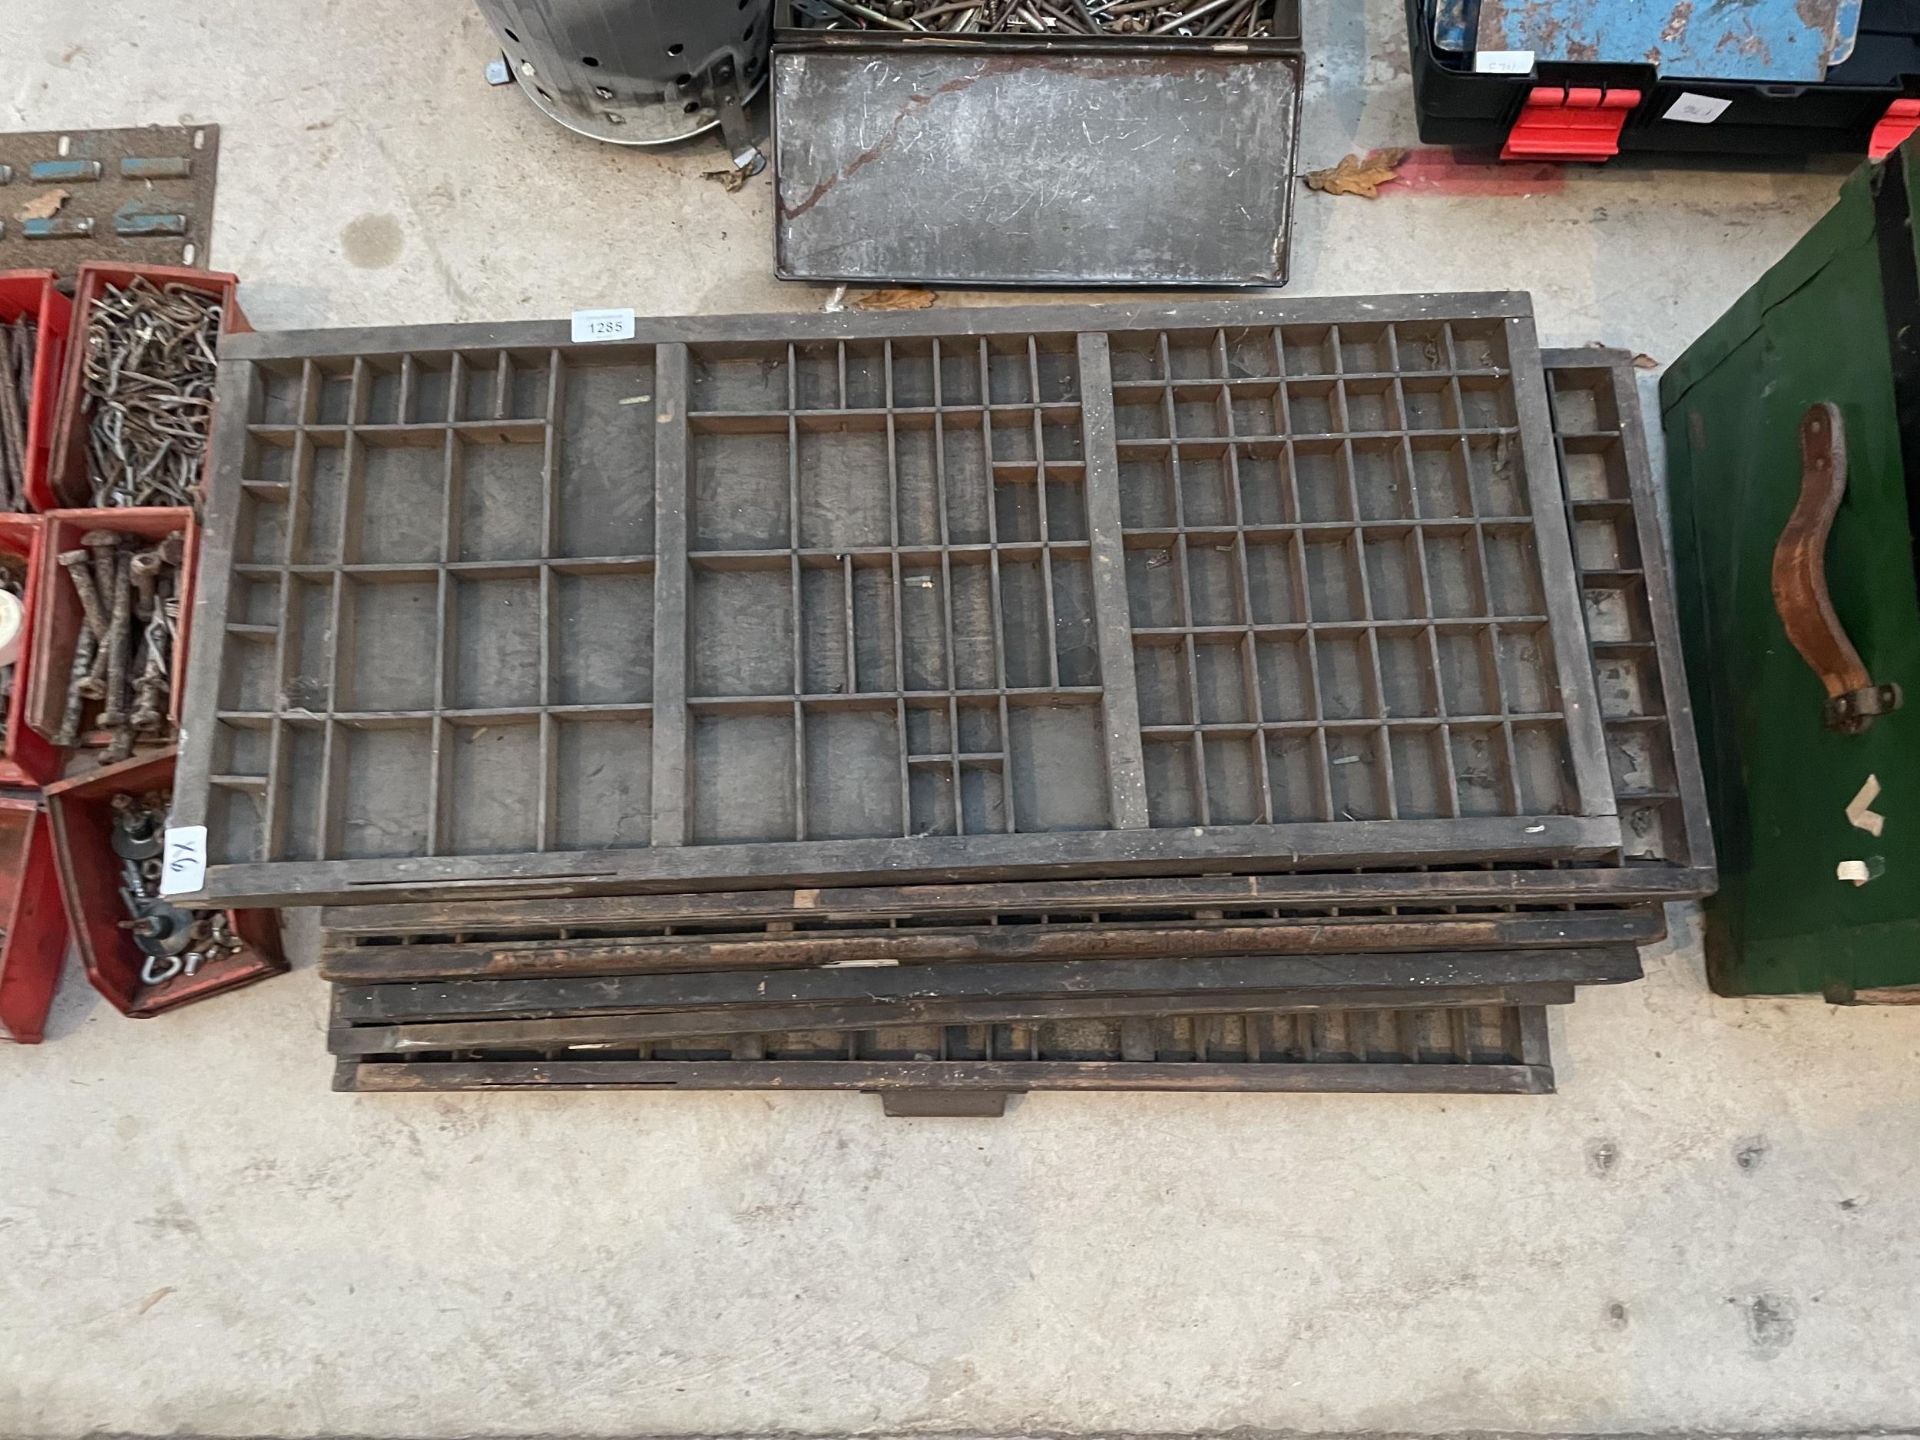 A GROUP OF SIX VINTAGE WOODEN PRINTERS TRAYS - Image 2 of 2